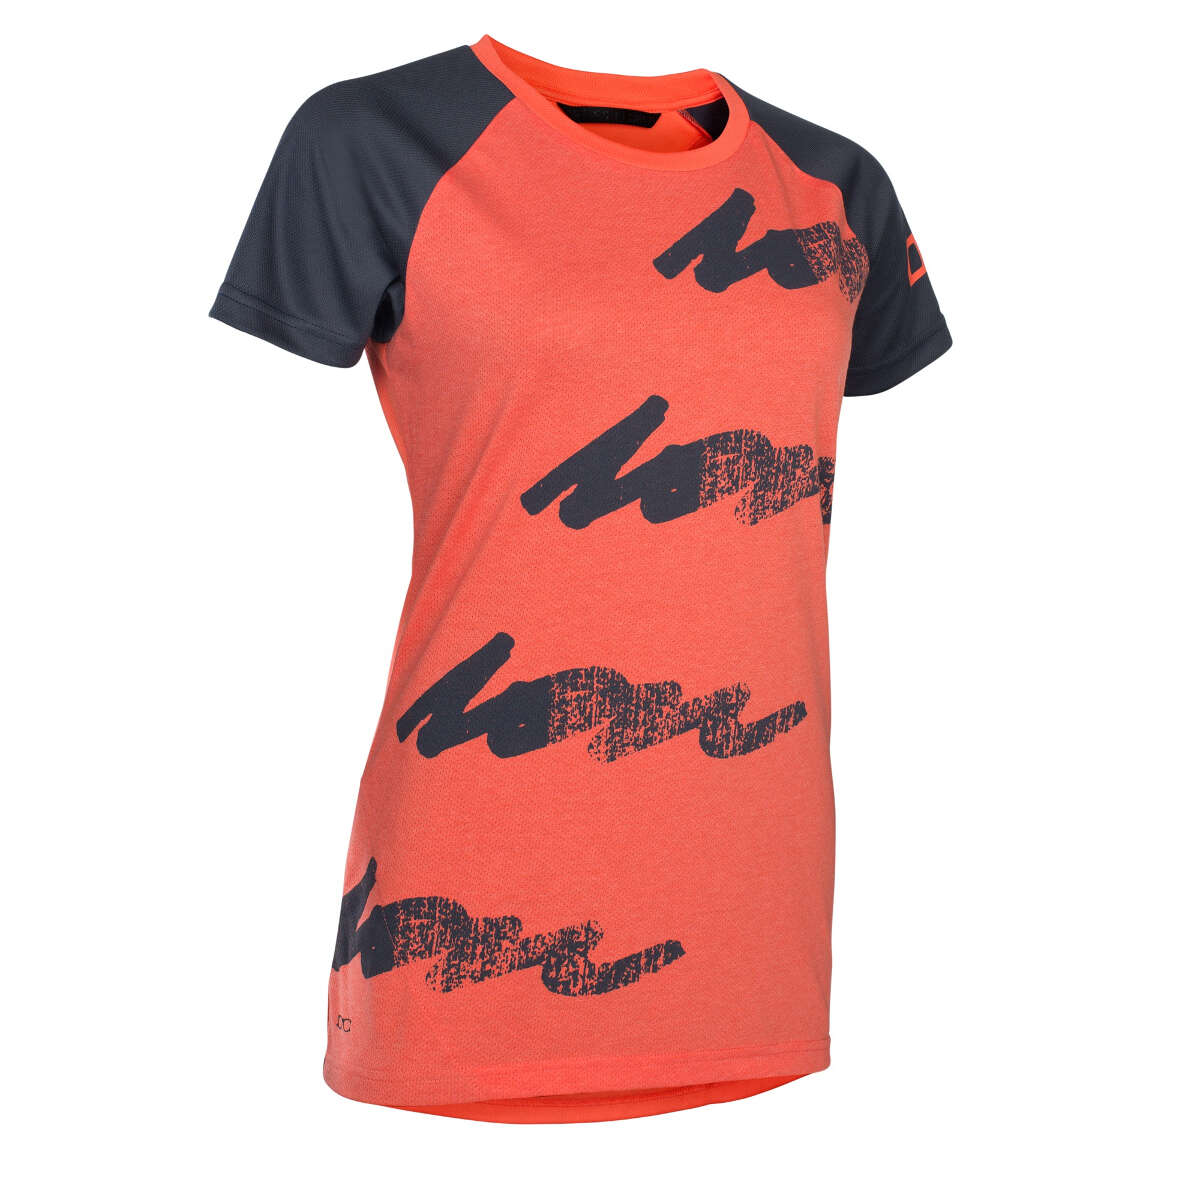 ION Girls Freeride Jersey Short Sleeve Scrub Amp Hot Coral